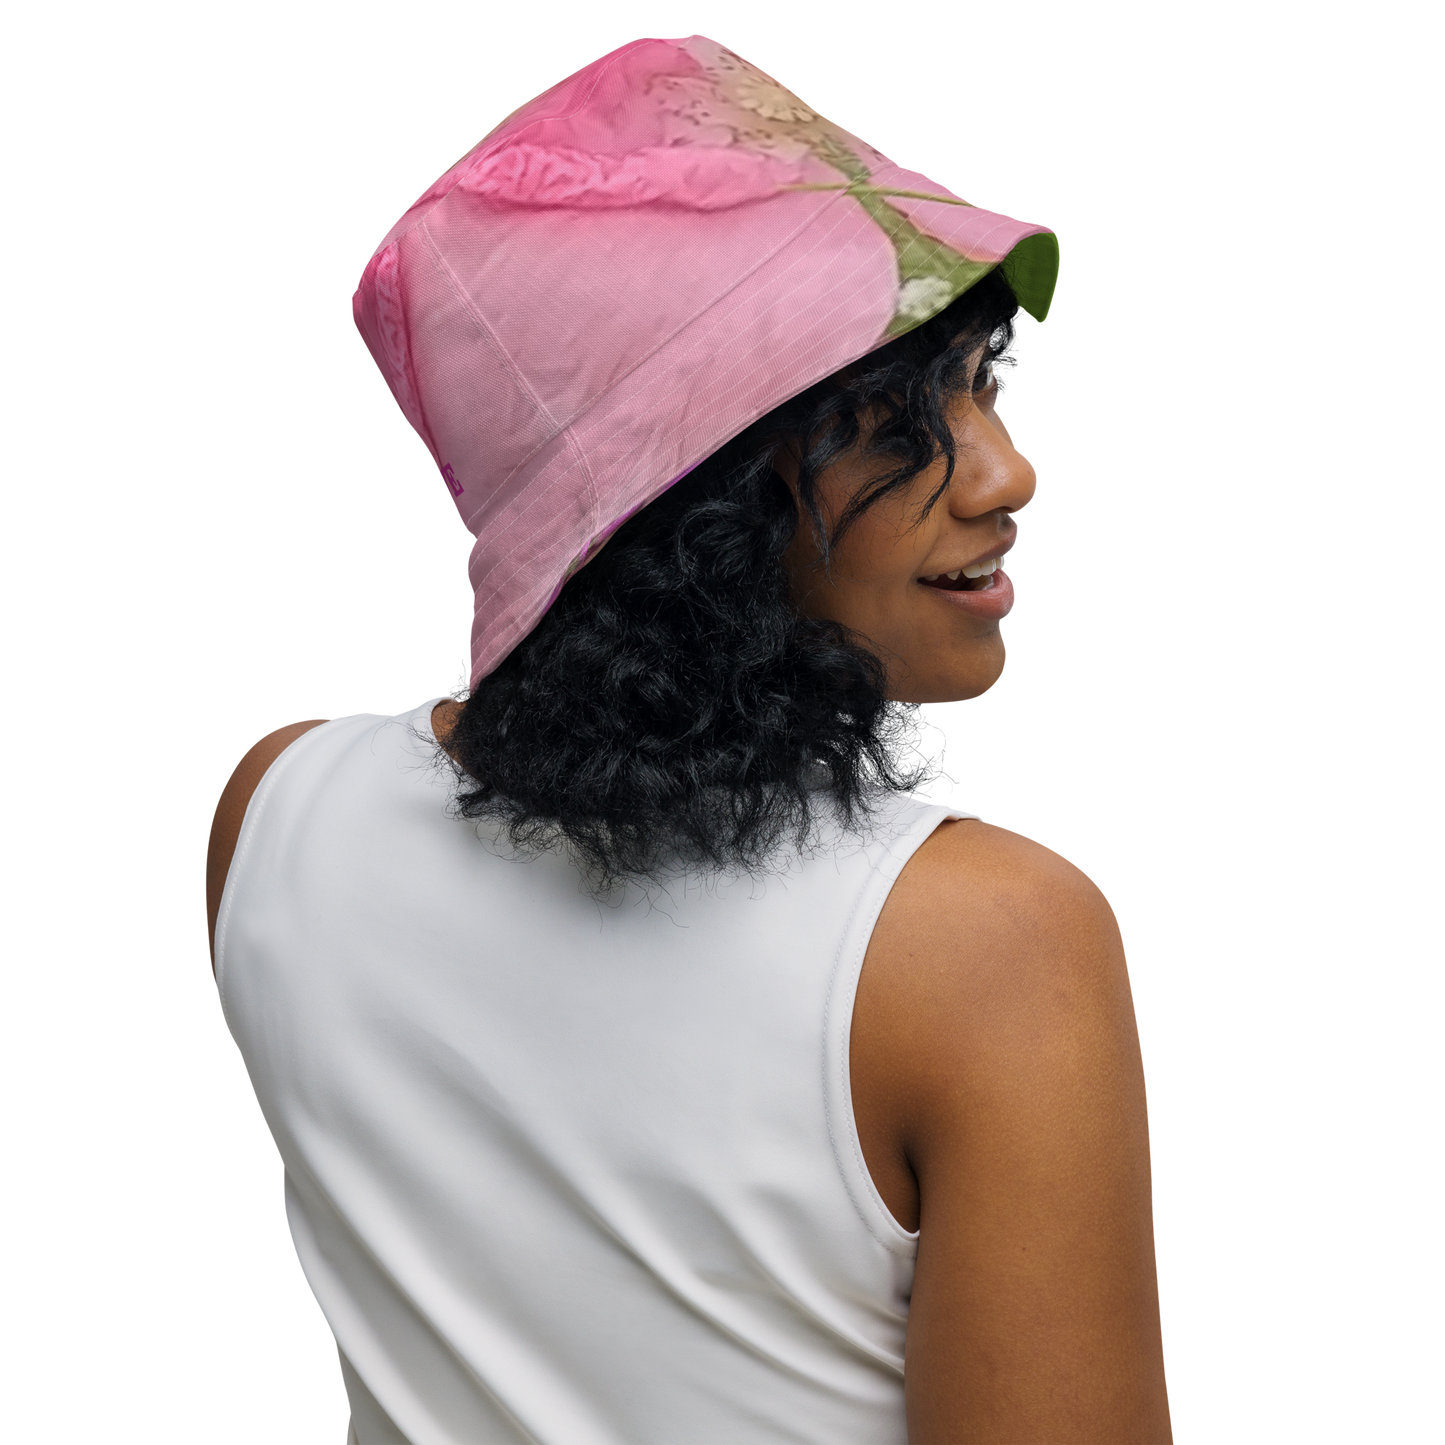 The FLOWER LOVE Collection - "Pretty Pink Poppies" Design Premium Reversible Bucket Hat - Green Inside - Beach Hat, Gifts for Her